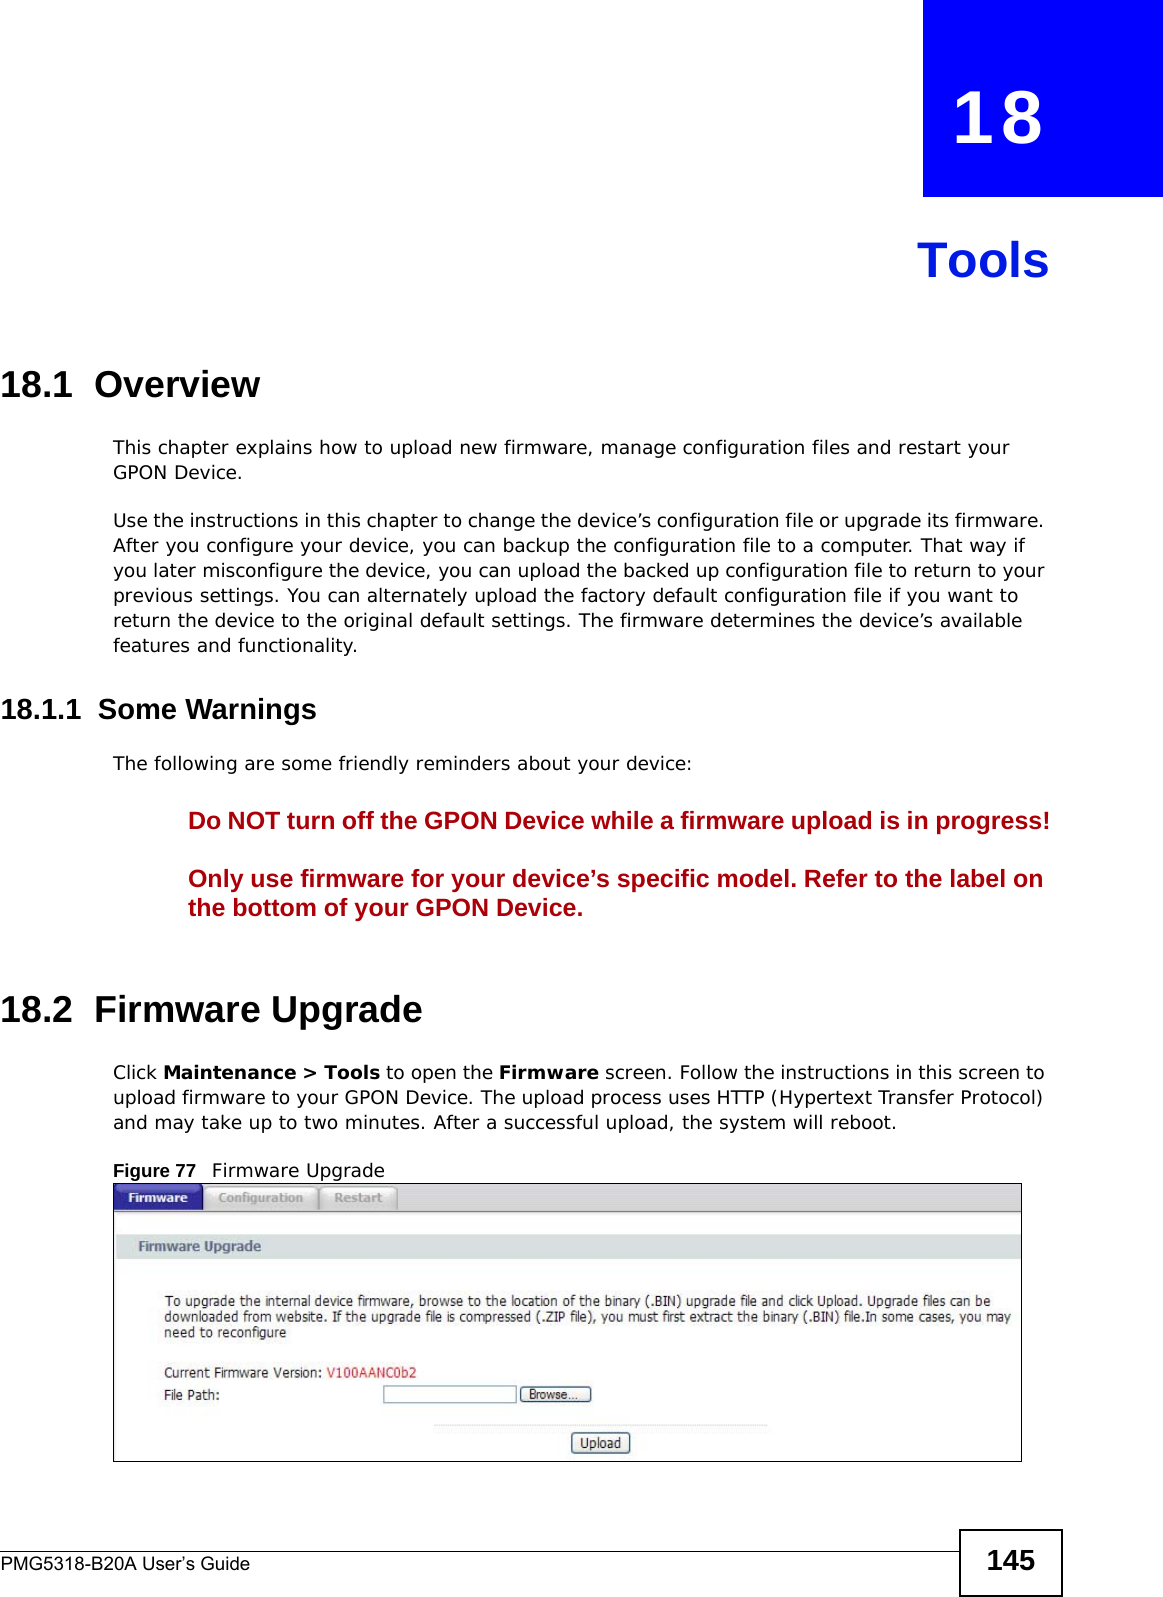 PMG5318-B20A User’s Guide 145CHAPTER   18Tools18.1  OverviewThis chapter explains how to upload new firmware, manage configuration files and restart your GPON Device. Use the instructions in this chapter to change the device’s configuration file or upgrade its firmware. After you configure your device, you can backup the configuration file to a computer. That way if you later misconfigure the device, you can upload the backed up configuration file to return to your previous settings. You can alternately upload the factory default configuration file if you want to return the device to the original default settings. The firmware determines the device’s available features and functionality.18.1.1  Some WarningsThe following are some friendly reminders about your device:Do NOT turn off the GPON Device while a firmware upload is in progress!Only use firmware for your device’s specific model. Refer to the label on the bottom of your GPON Device.18.2  Firmware Upgrade  Click Maintenance &gt; Tools to open the Firmware screen. Follow the instructions in this screen to upload firmware to your GPON Device. The upload process uses HTTP (Hypertext Transfer Protocol) and may take up to two minutes. After a successful upload, the system will reboot.Figure 77   Firmware Upgrade